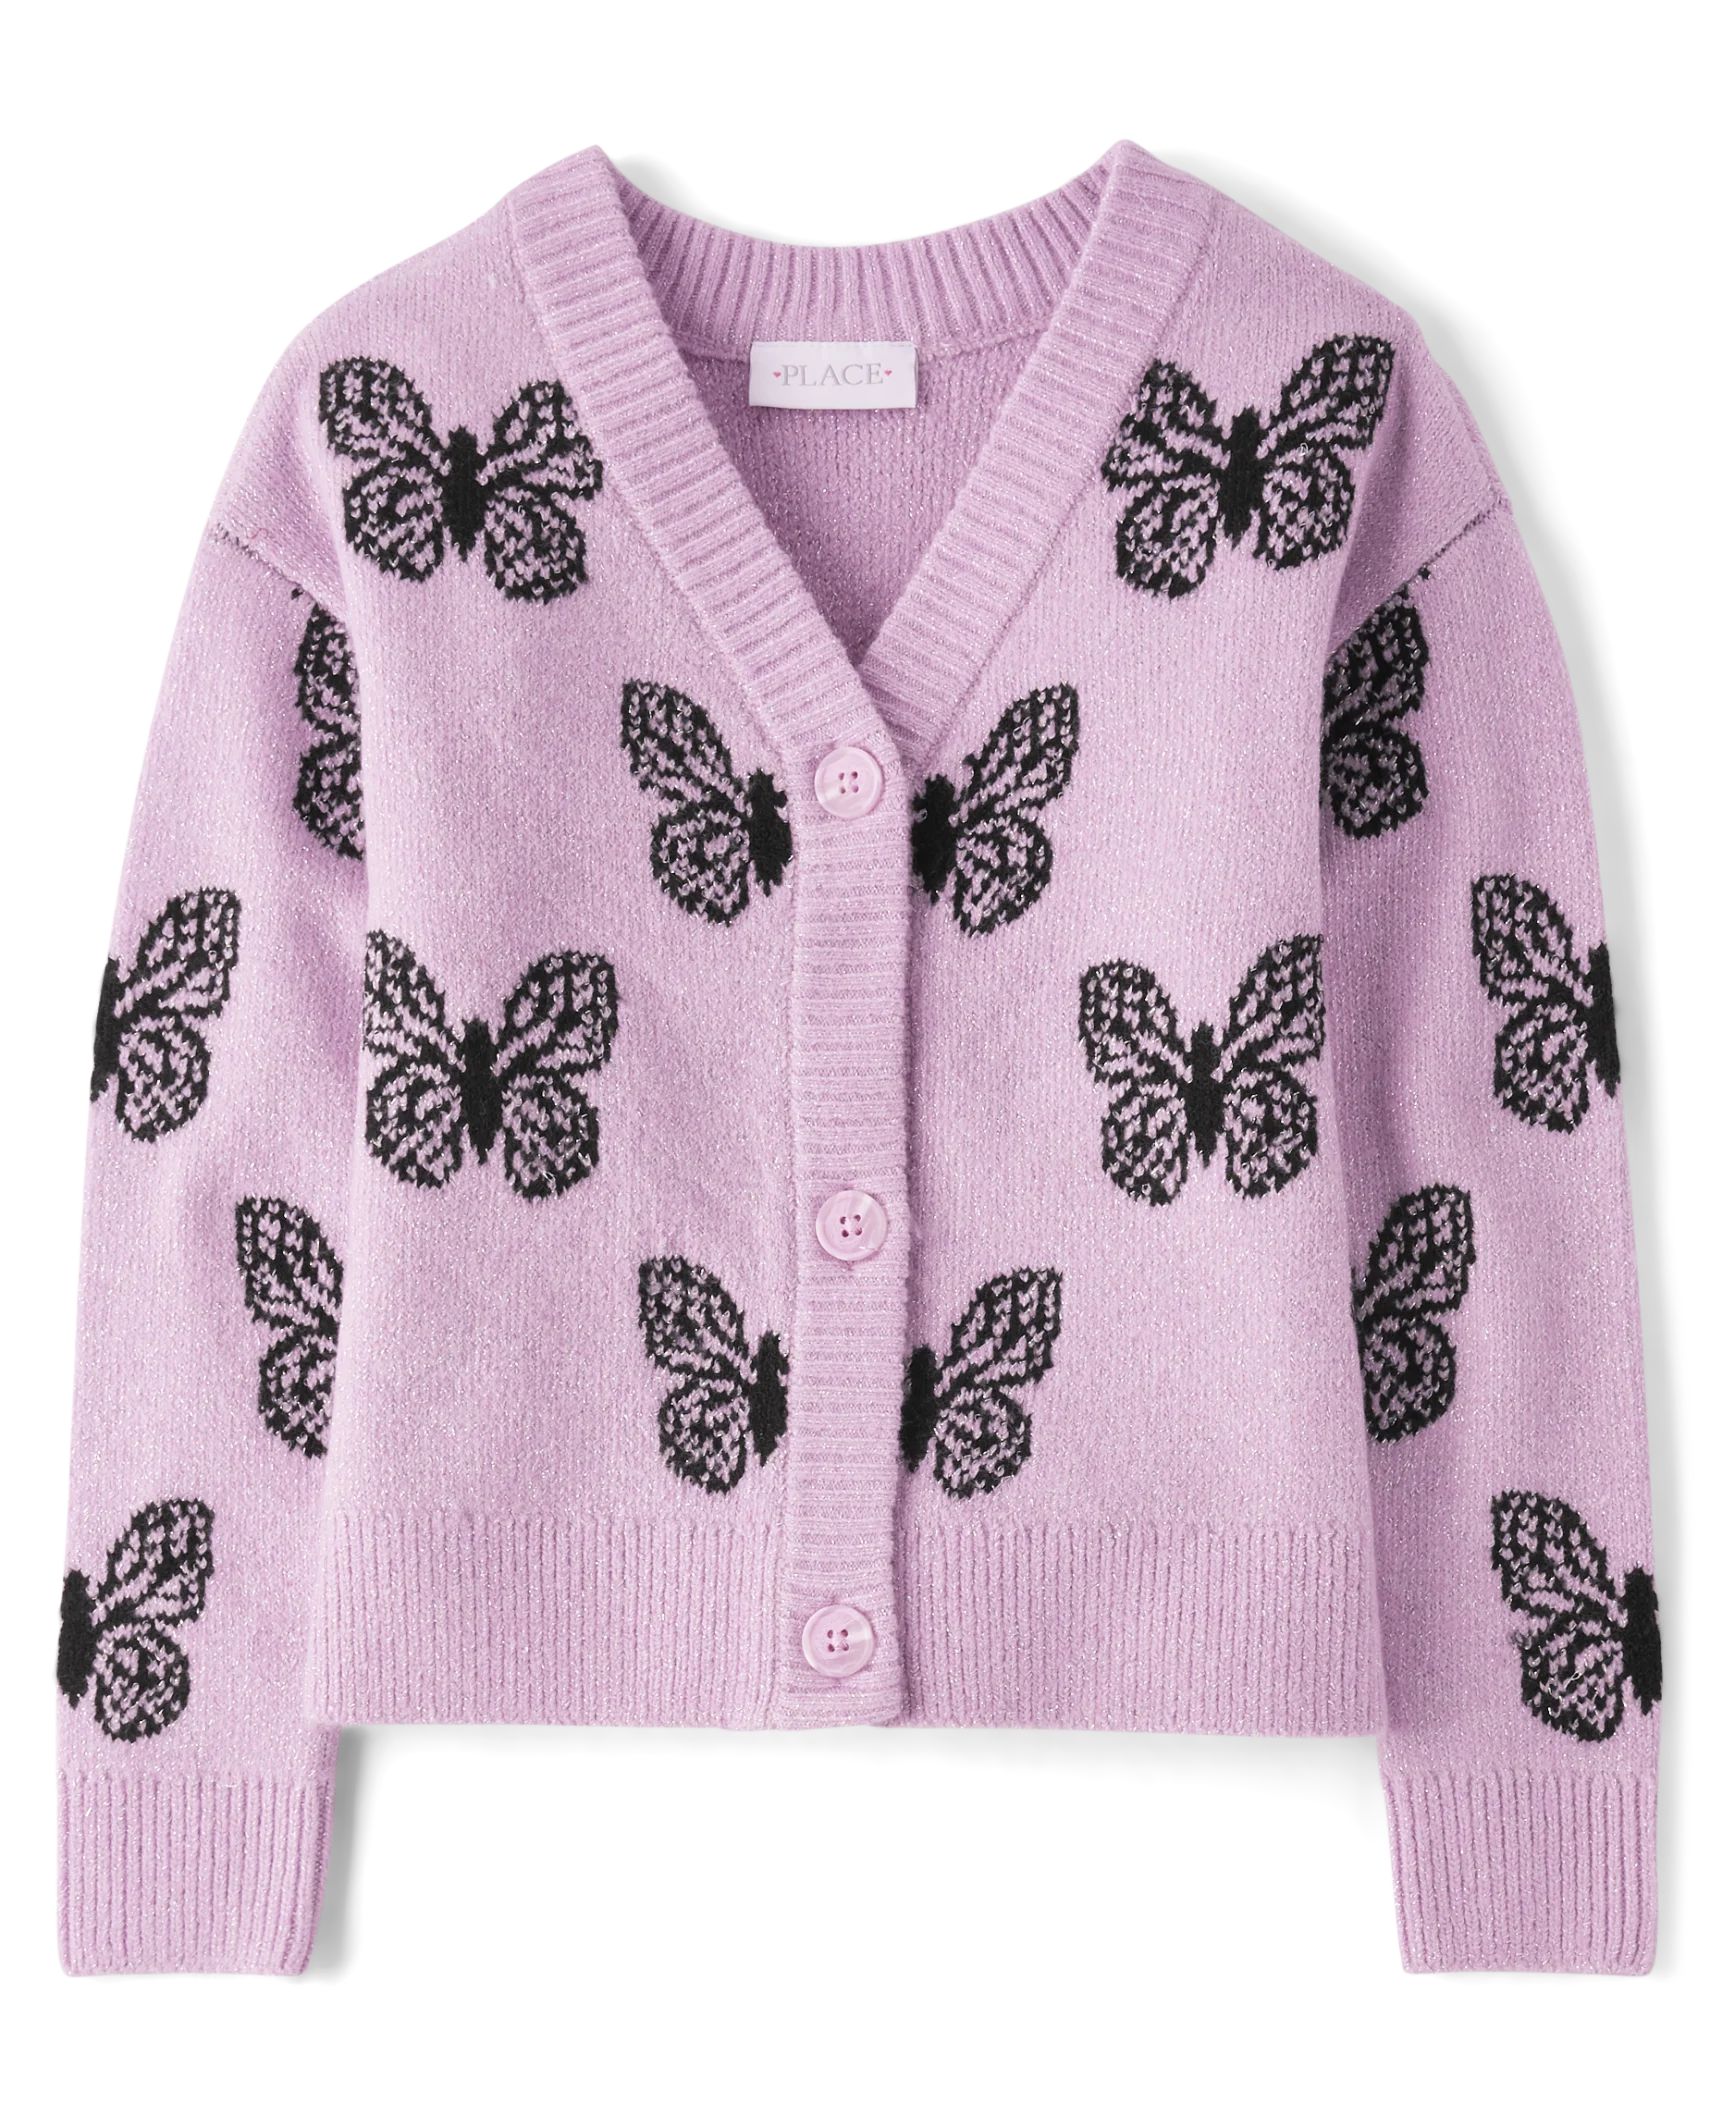 Girls Butterfly V-Neck Cardigan - lilac dust | The Children's Place